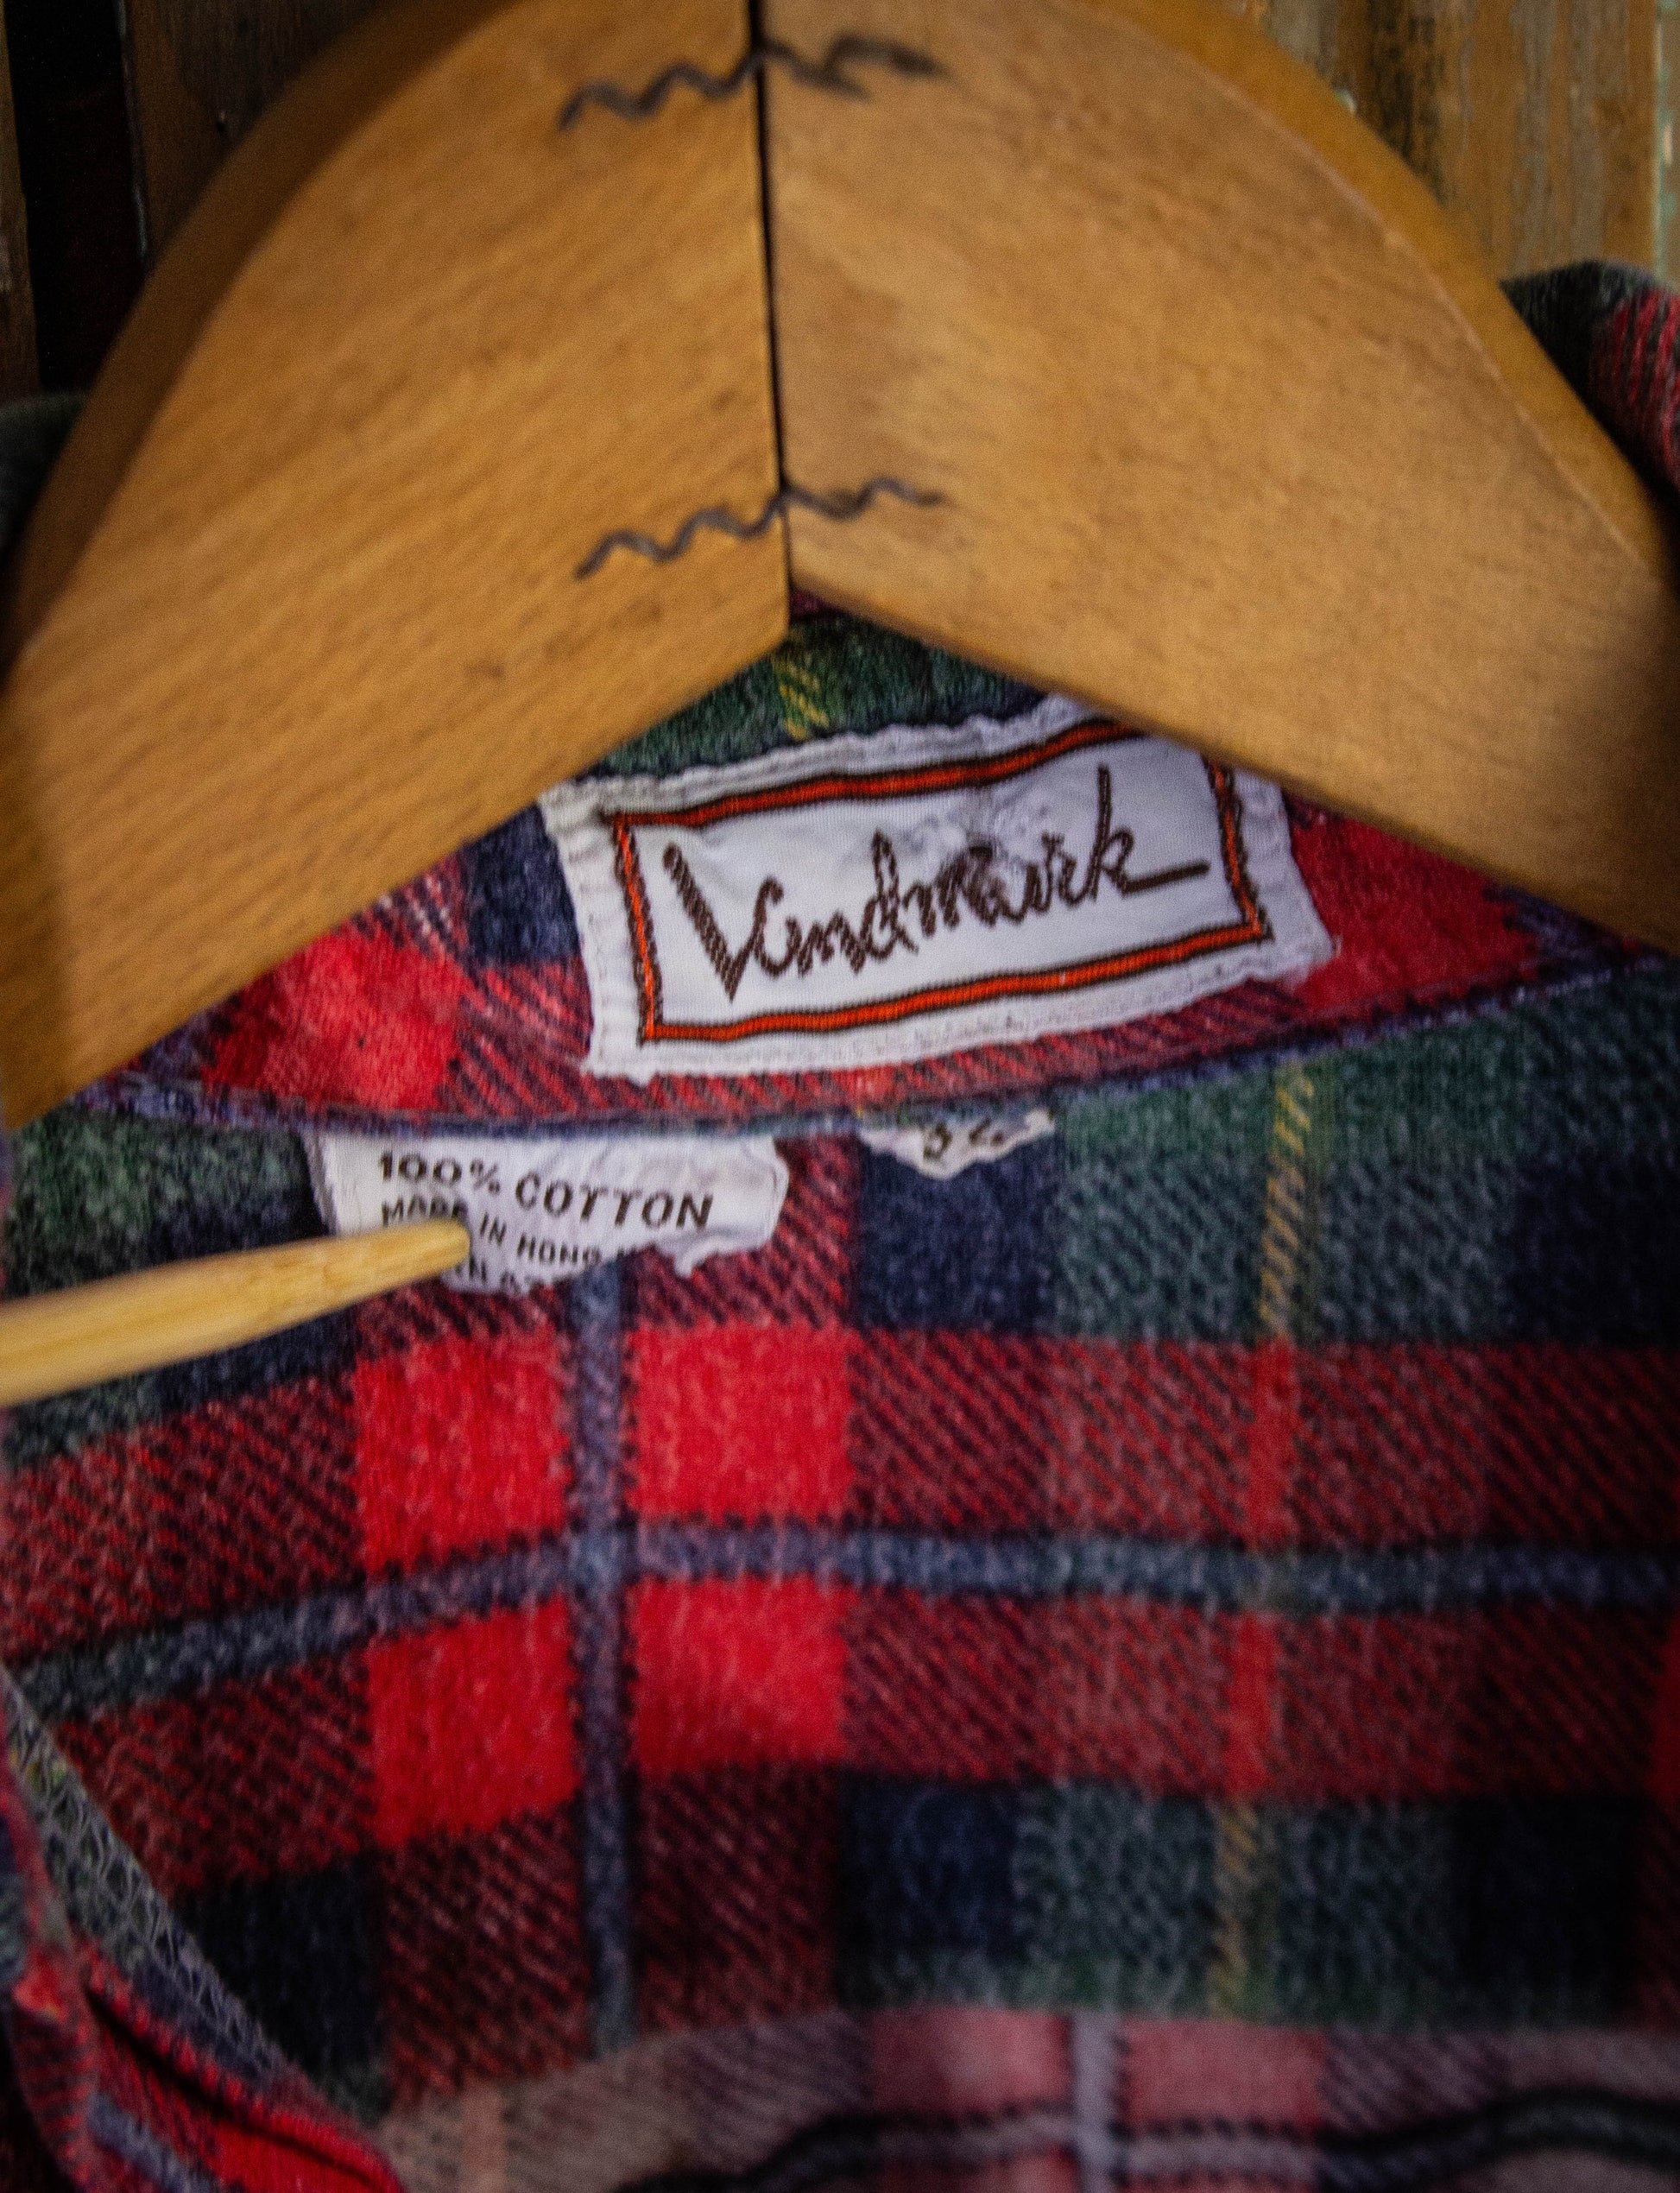 Vintage Vindmark Plaid Flannel Shirt Green Red and Blue Small